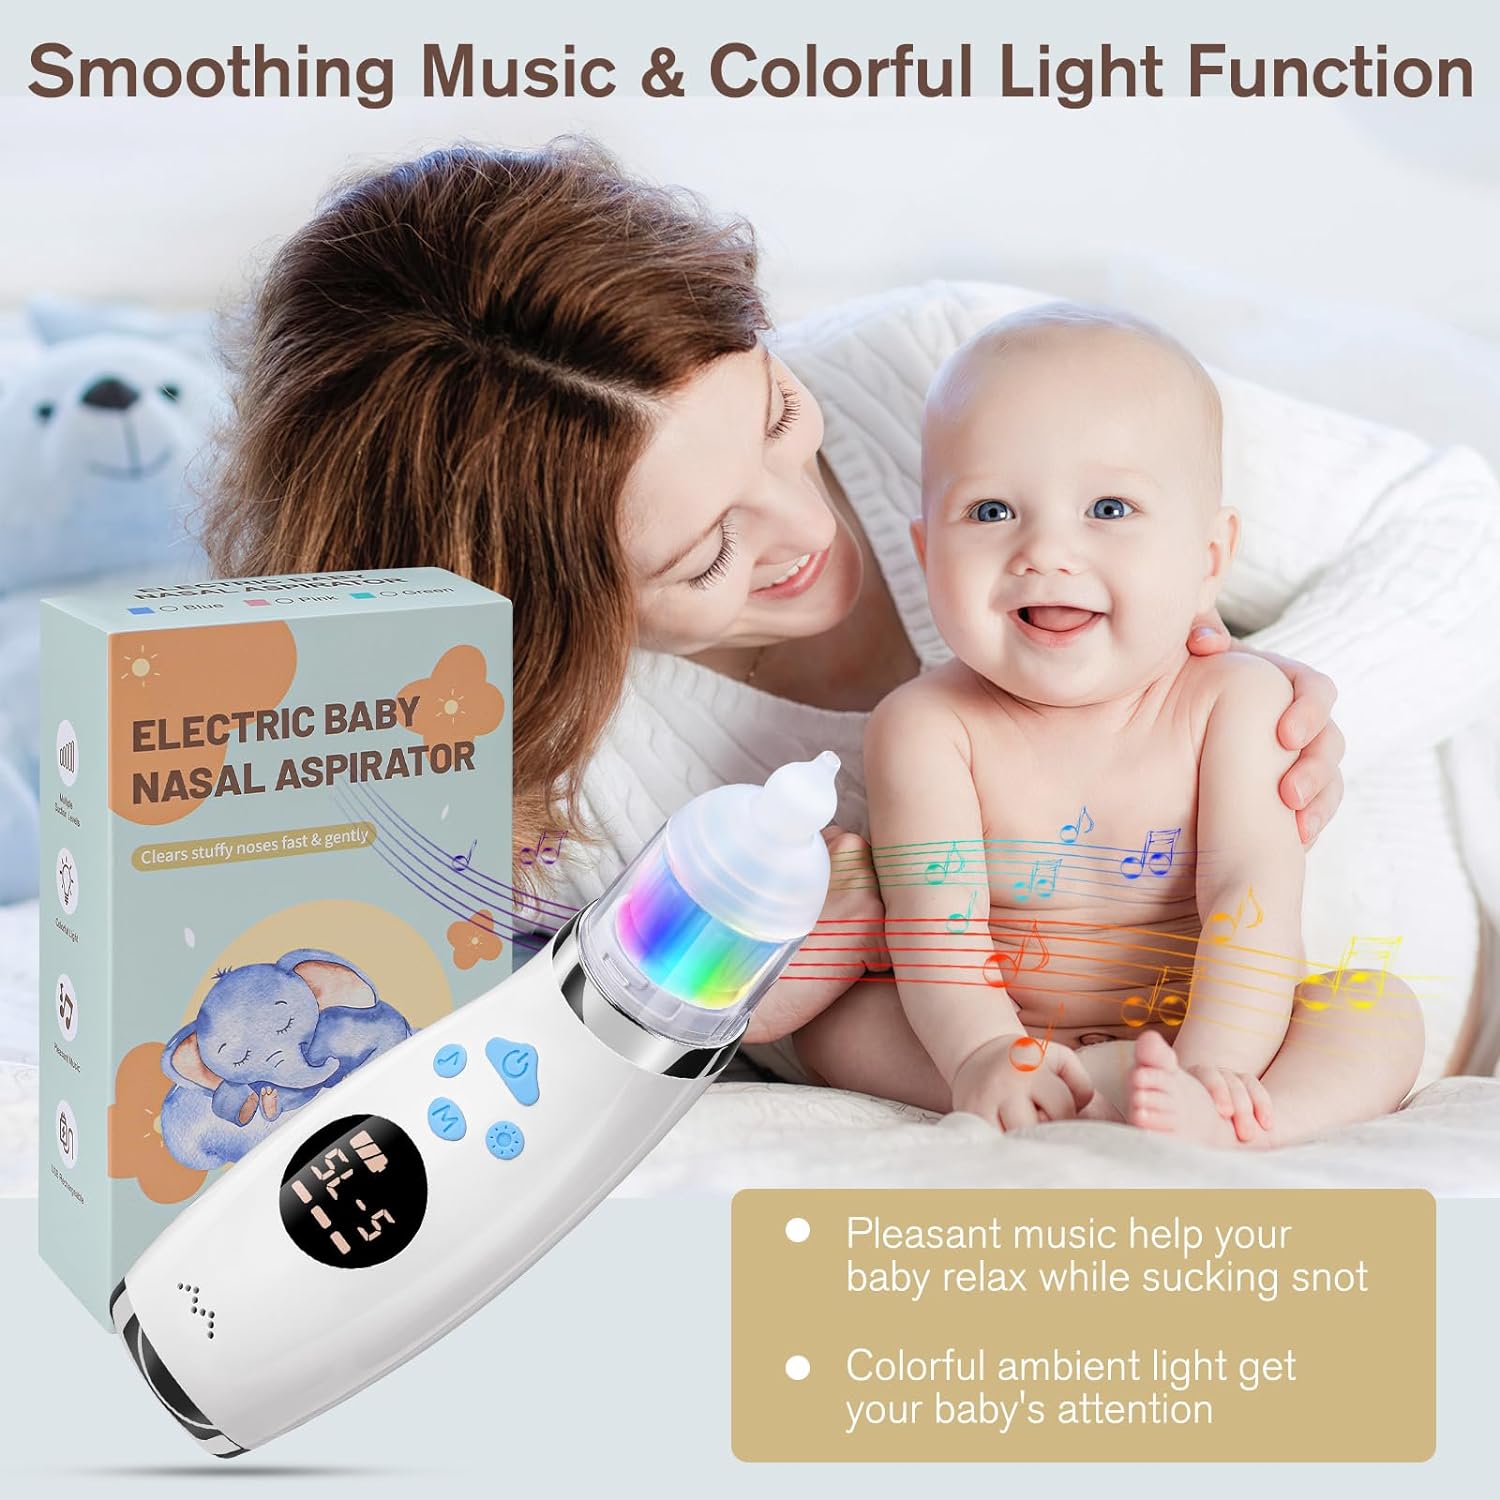 KKUYT Electric Nasal Aspirator for Baby, Baby Nose Sucker, Rechargeable Snot Booger Sucker Auto Nose Cleaner for Toldder with 5 Suction Modes, 3 Silicone Tips, Colorful Light & Soothing Music